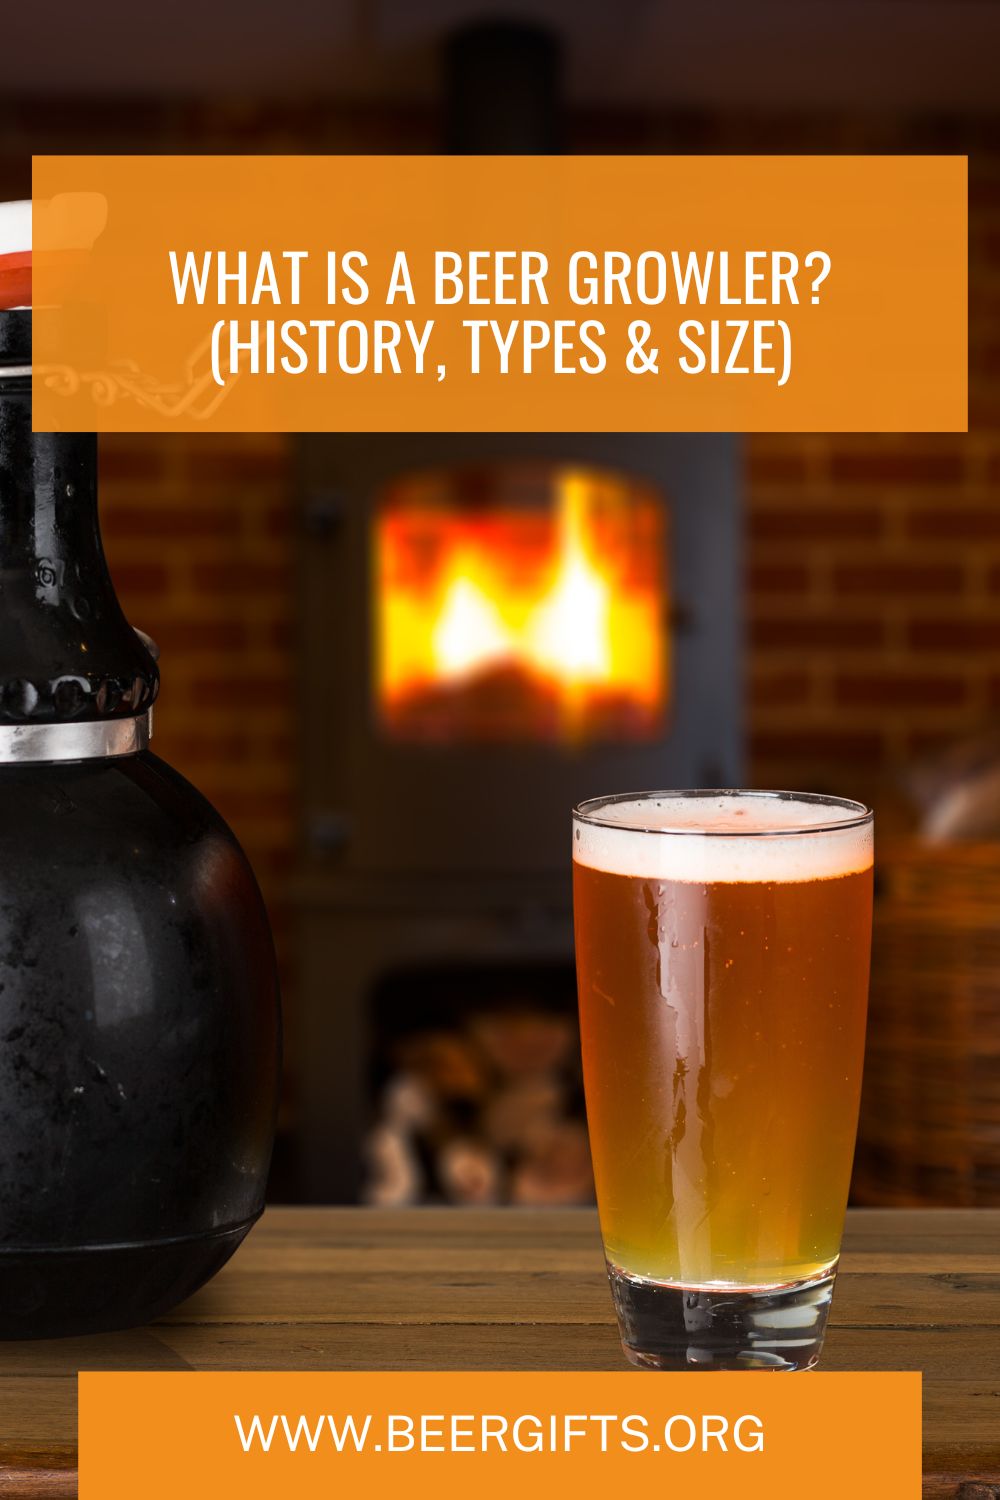 What Is a Beer Growler (History, Types & Size)